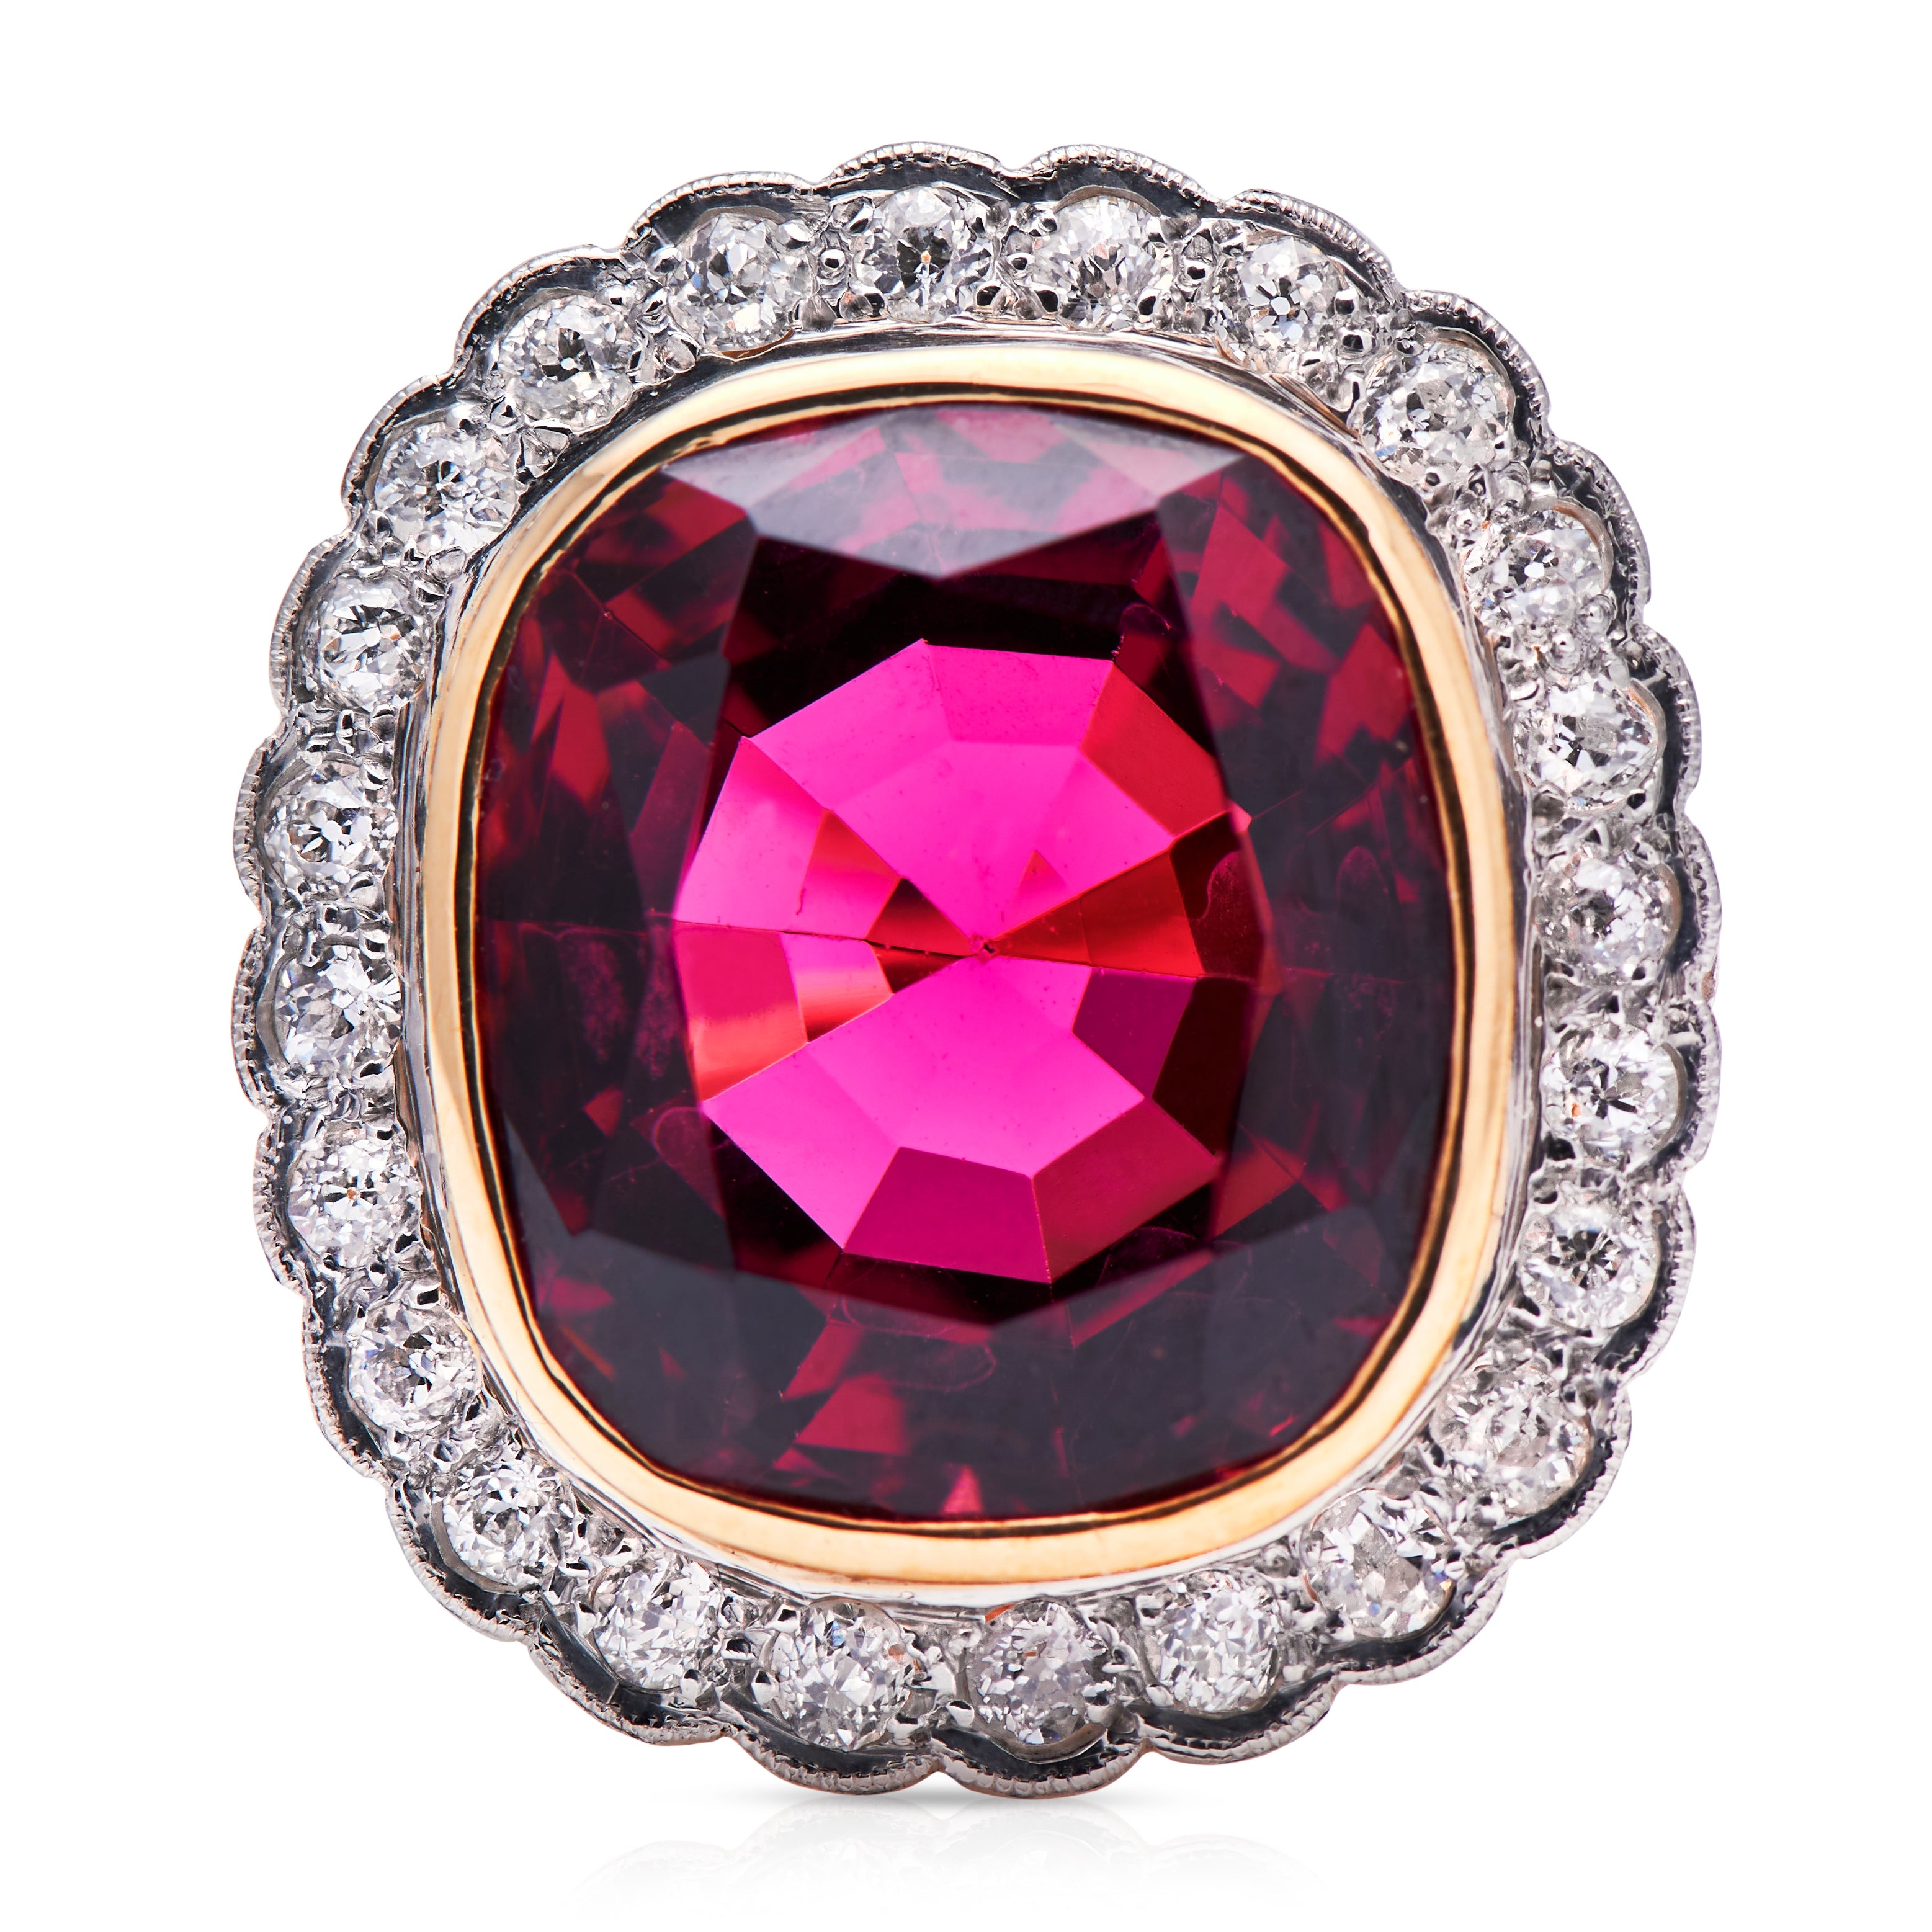 Edwardian, 18ct Gold, Rubellite Tourmaline and Diamond Ring – Vintage Ring – Antique Ring Boutique